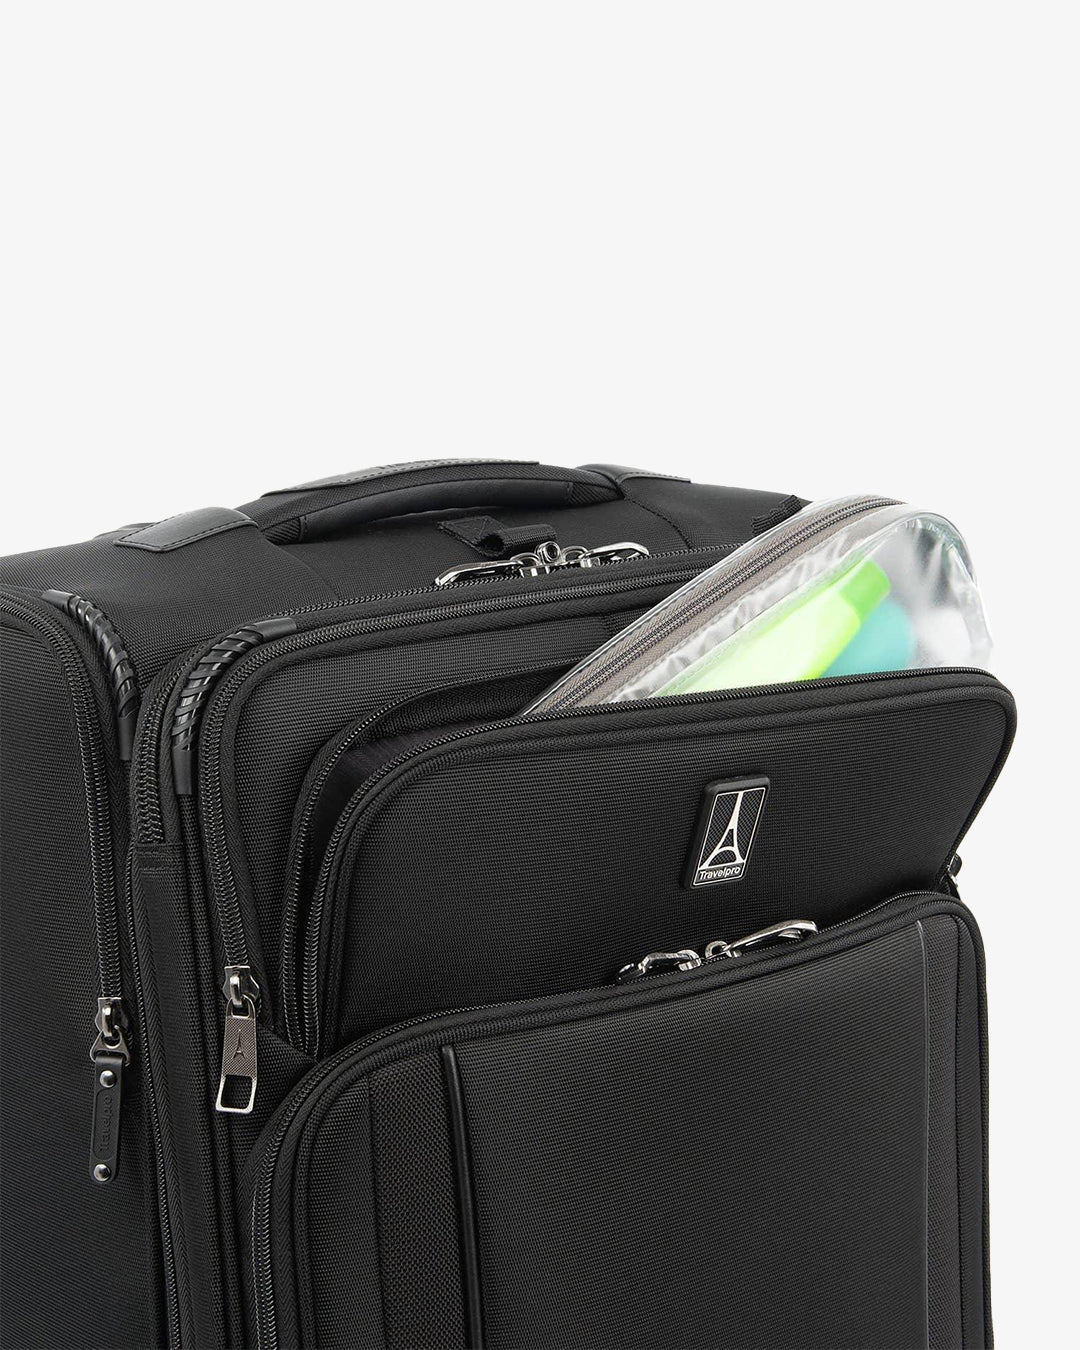 Travelpro Crew™ VersaPack™ Global Carry-On Expandable Rollaboard®